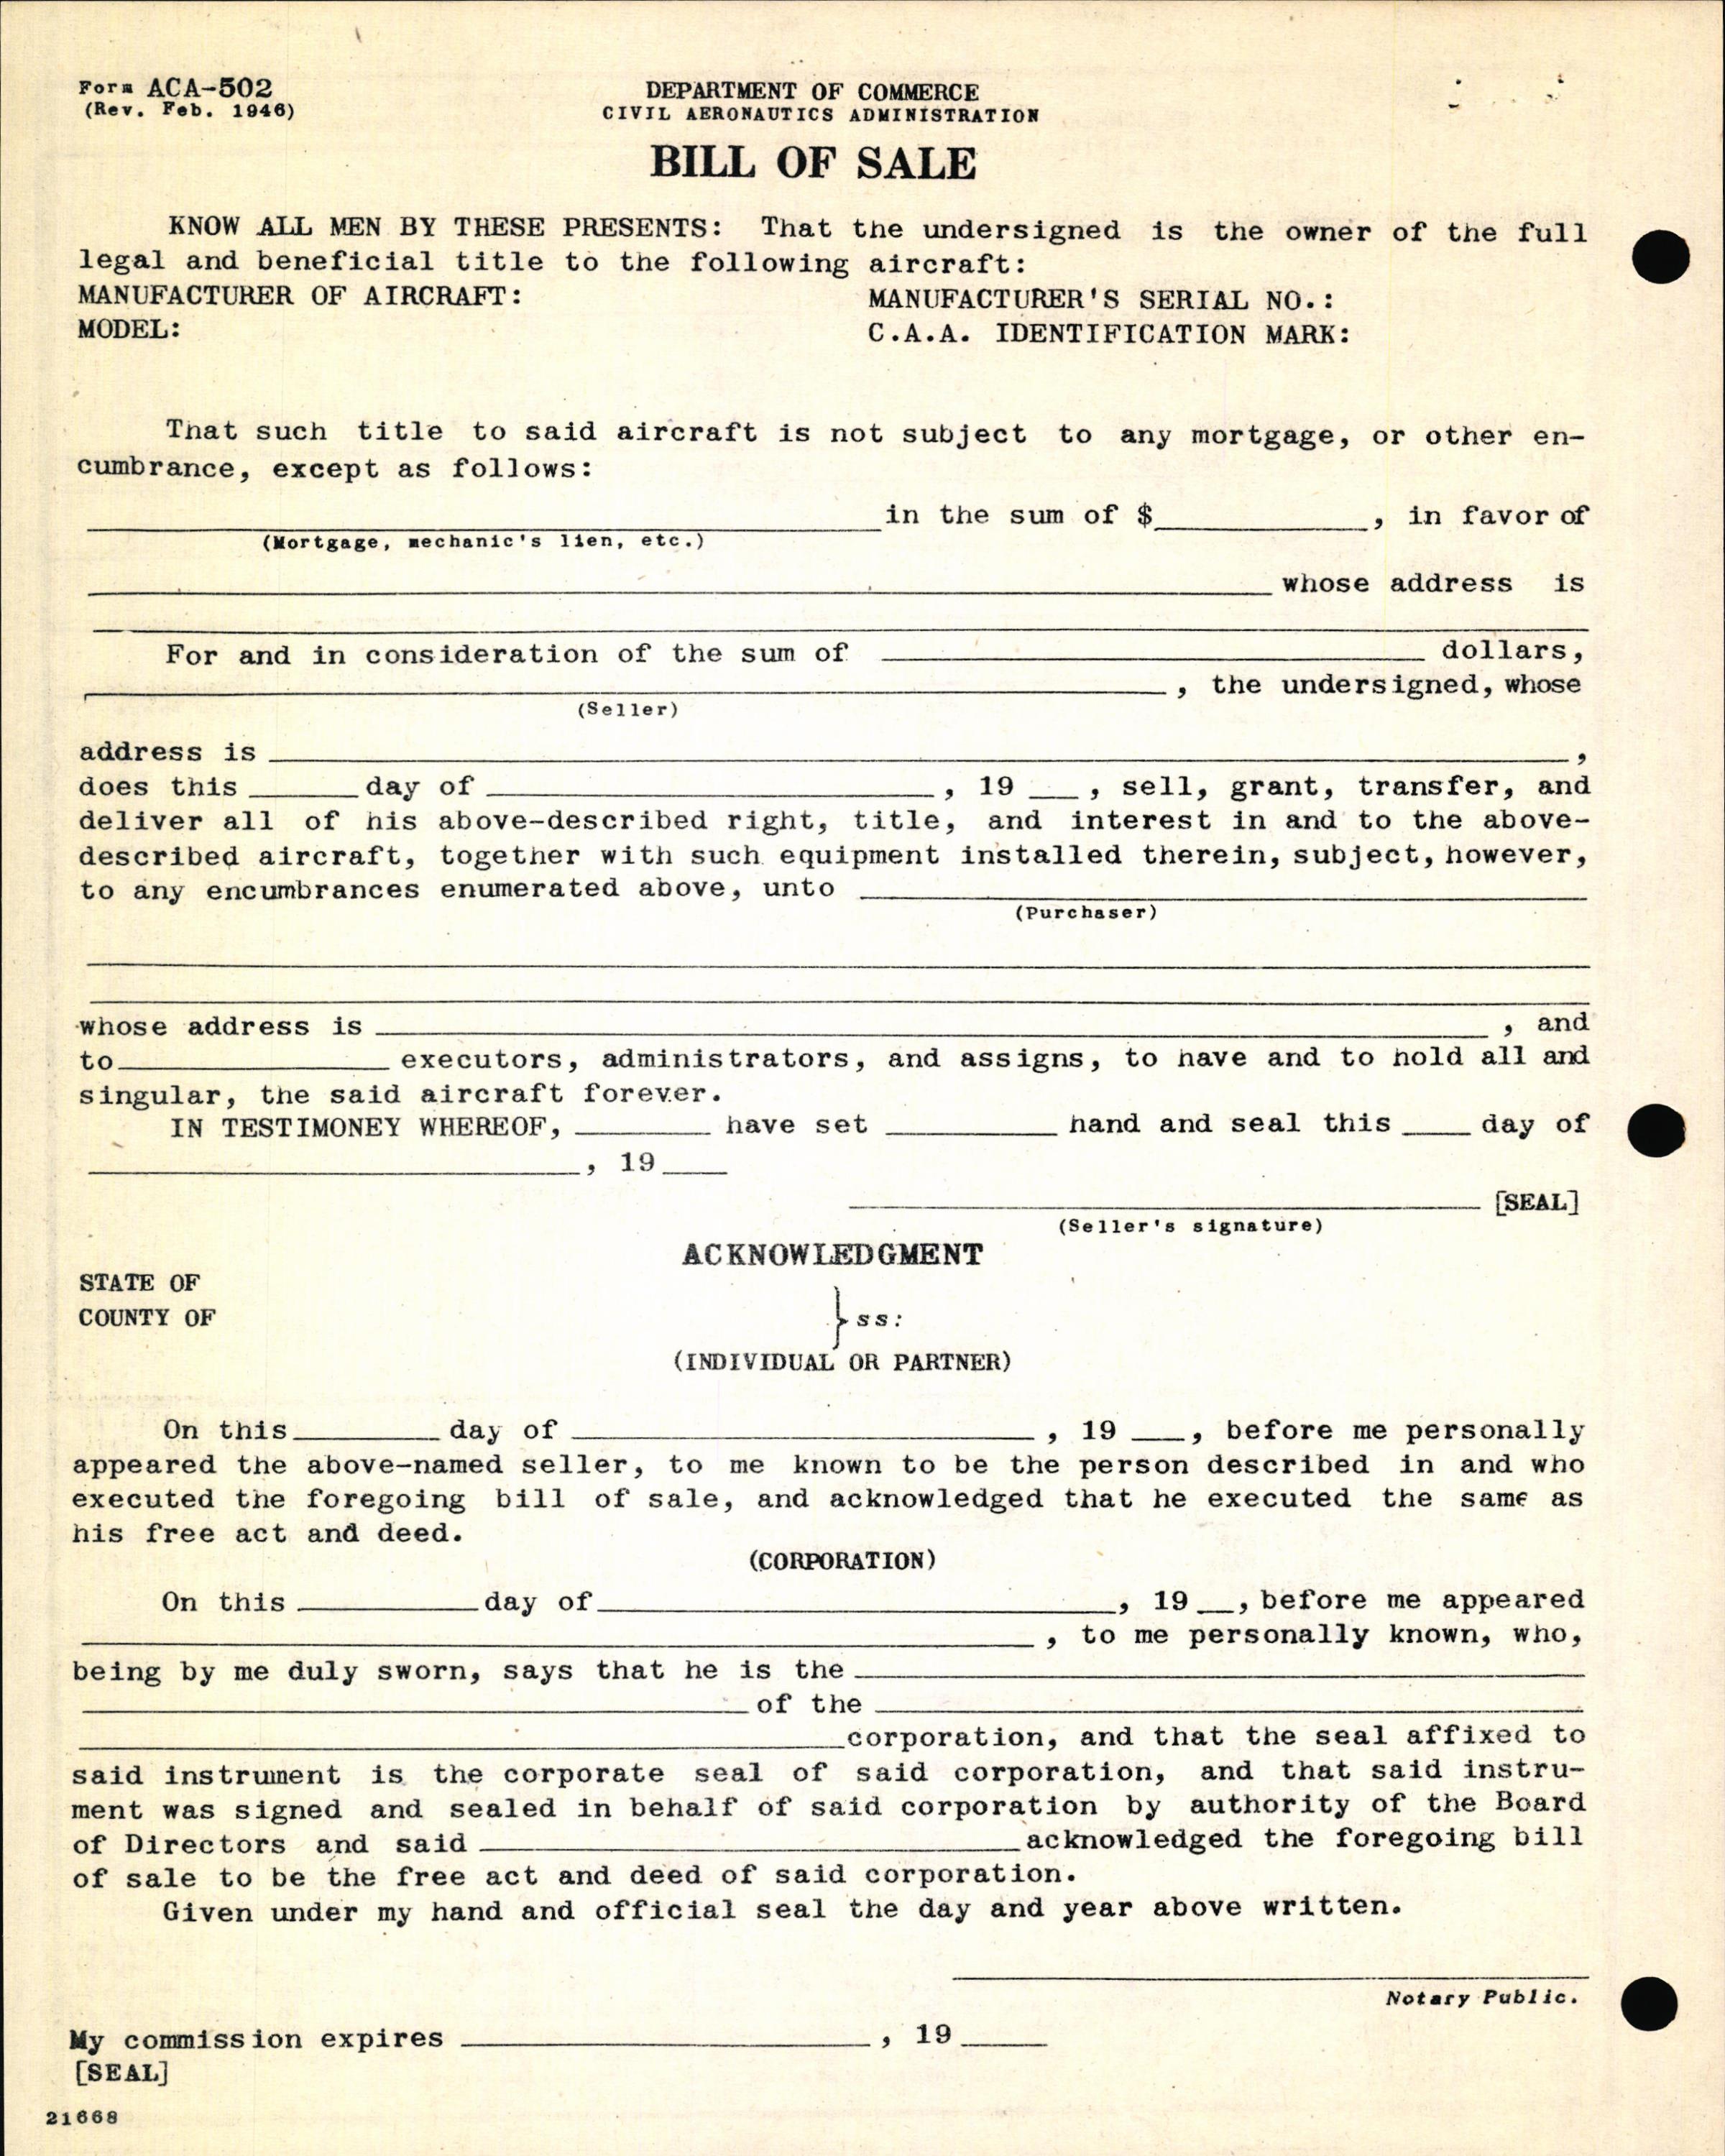 Sample page 6 from AirCorps Library document: Technical Information for Serial Number 1248